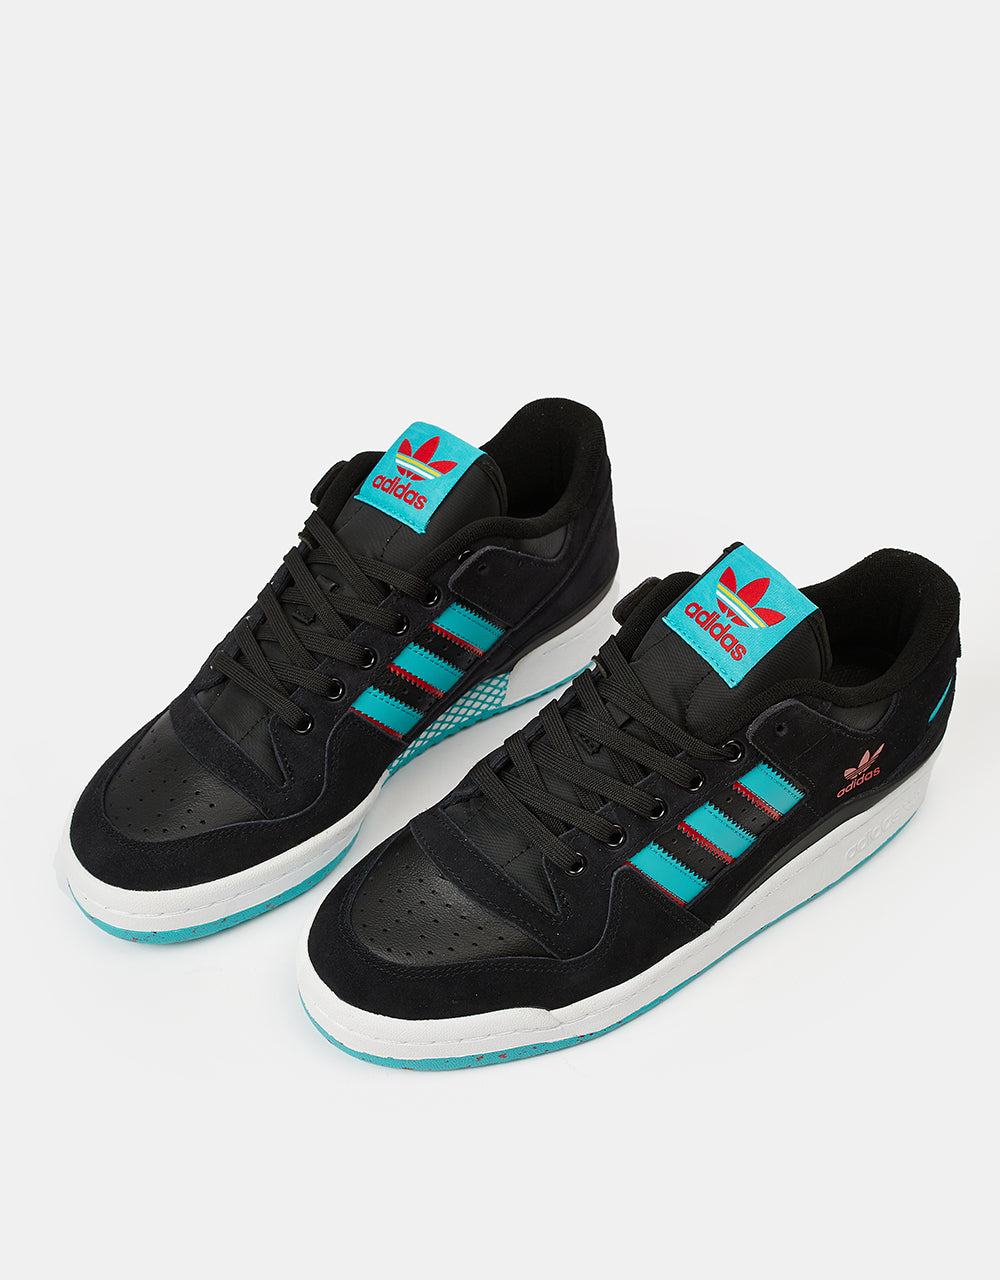 adidas Forum 84 Low ADV Skate Shoes - Core Black/Bold Gold/Better Scarlet